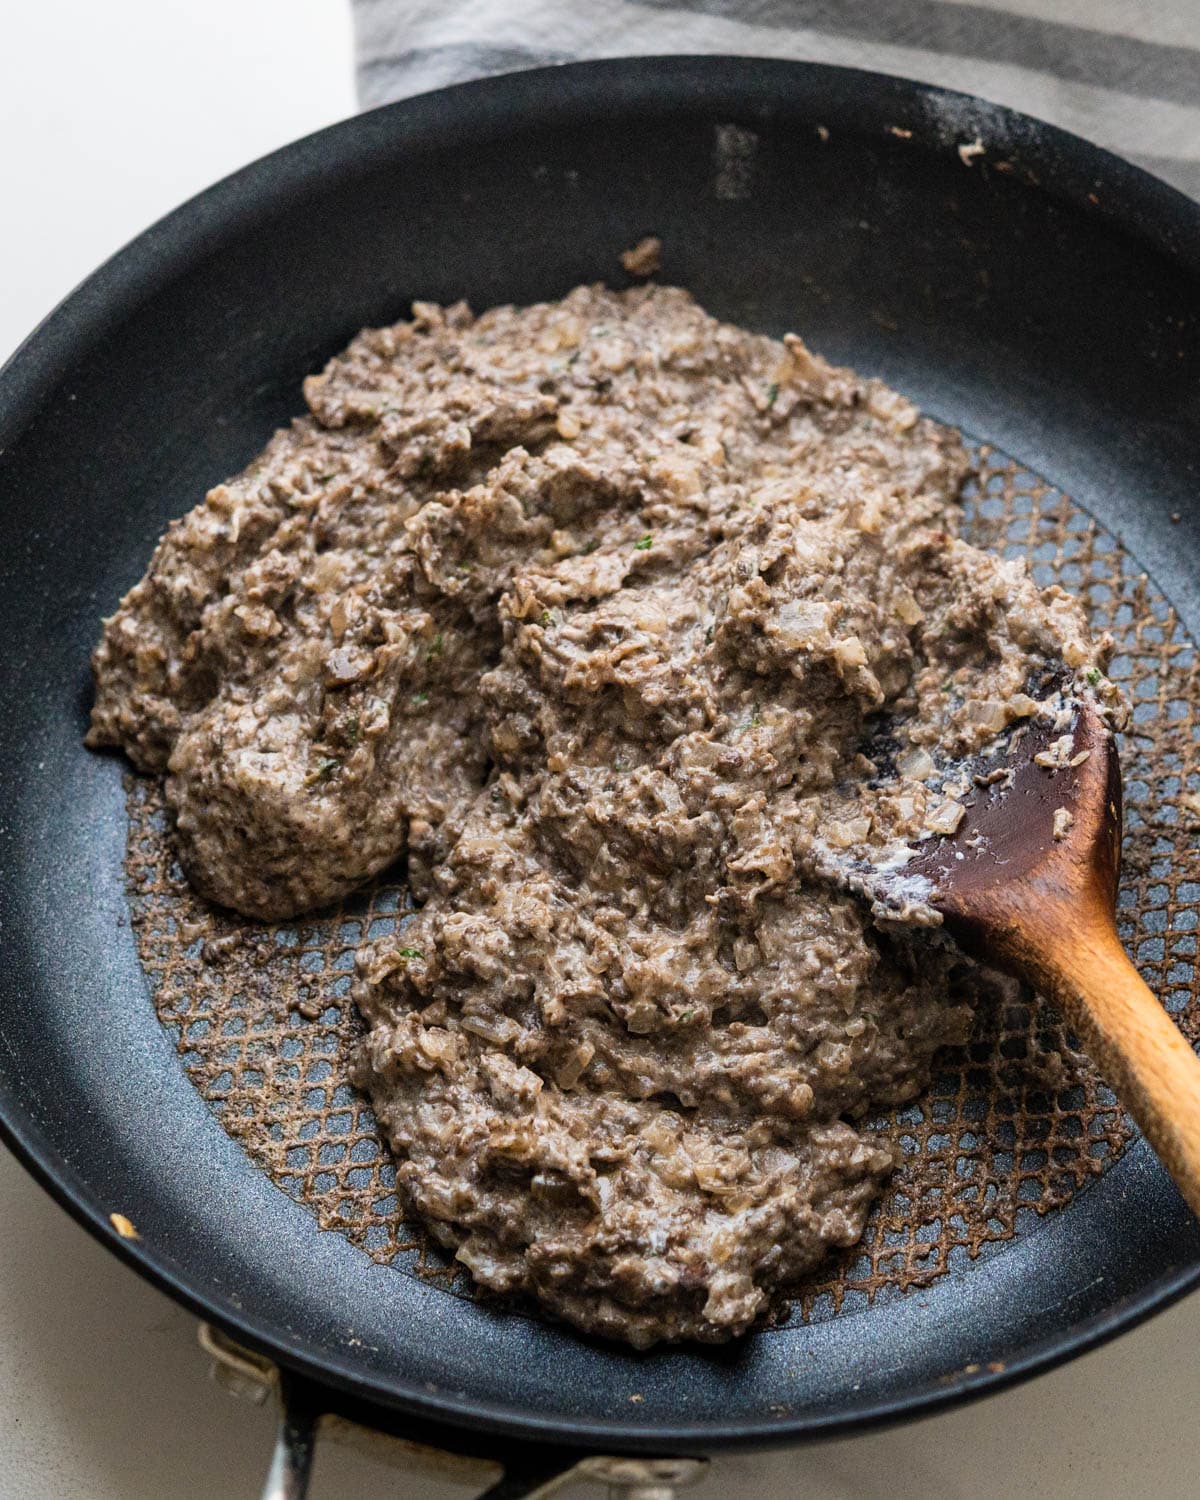 The duxelles is creamy and pasty looking.